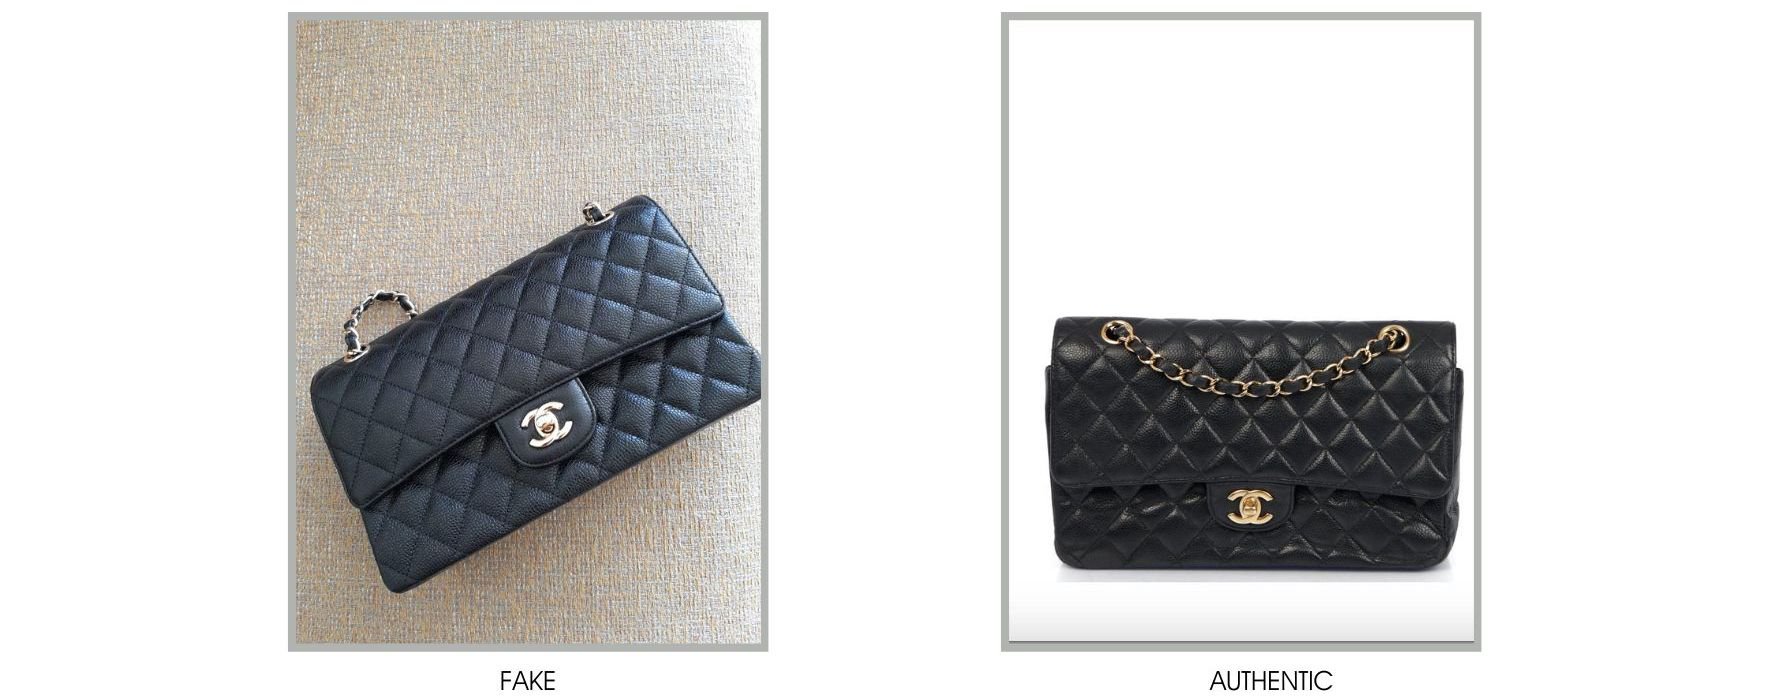 How To Spot Fake Chanel Bags | The Handbag Clinic